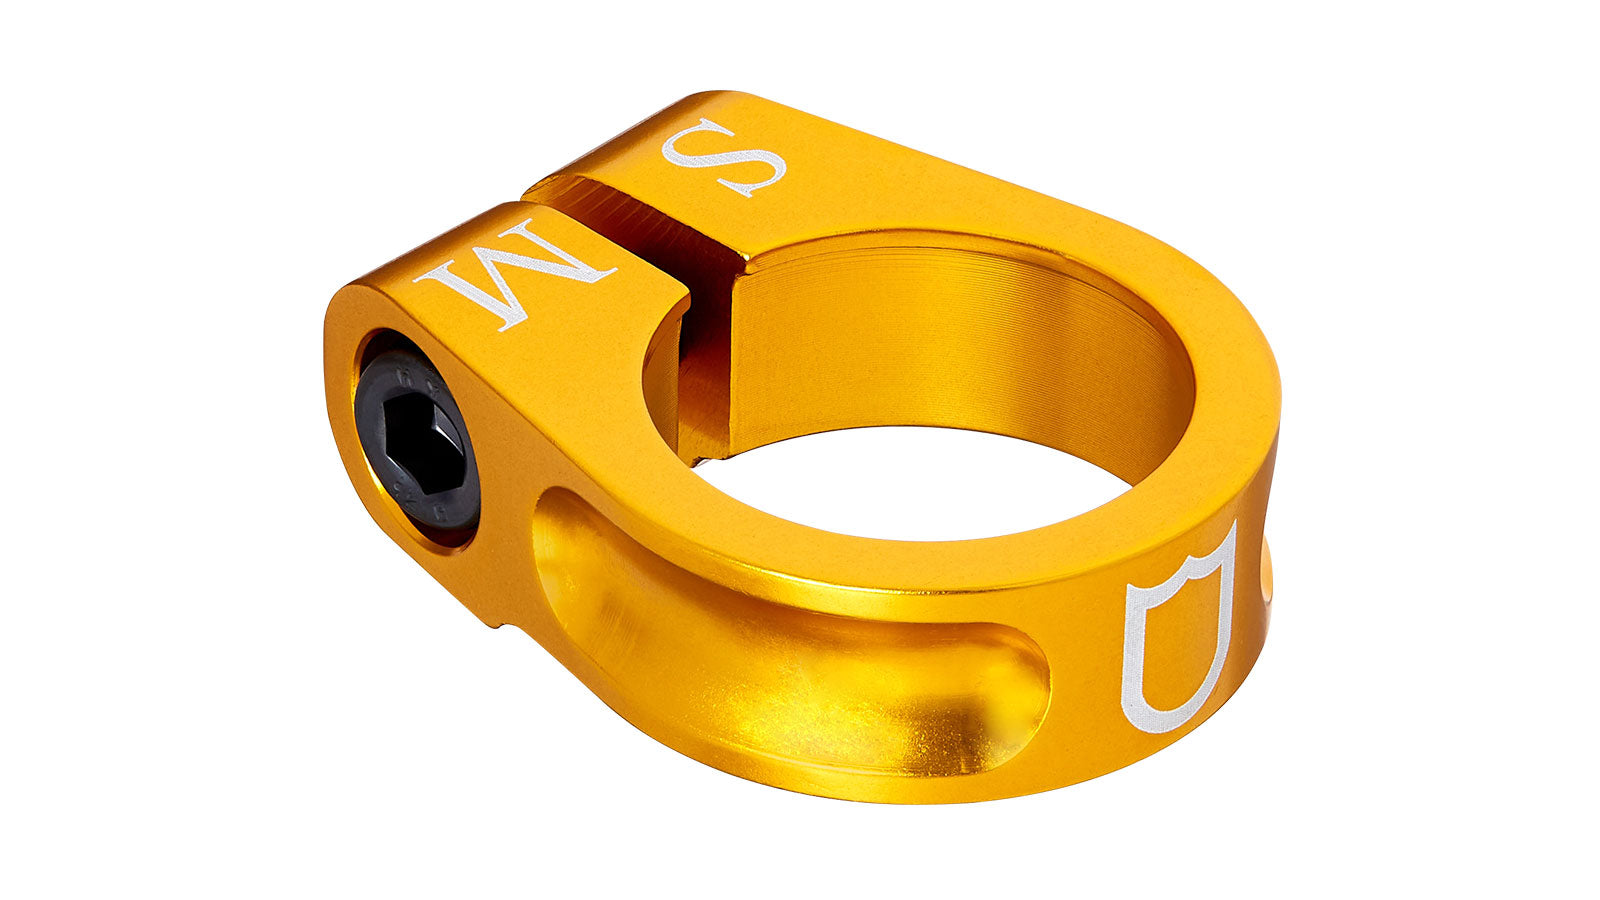 S&M XLT SEAT CLAMP GOLD 28.6mm I.D. for 25.4mm seatpost